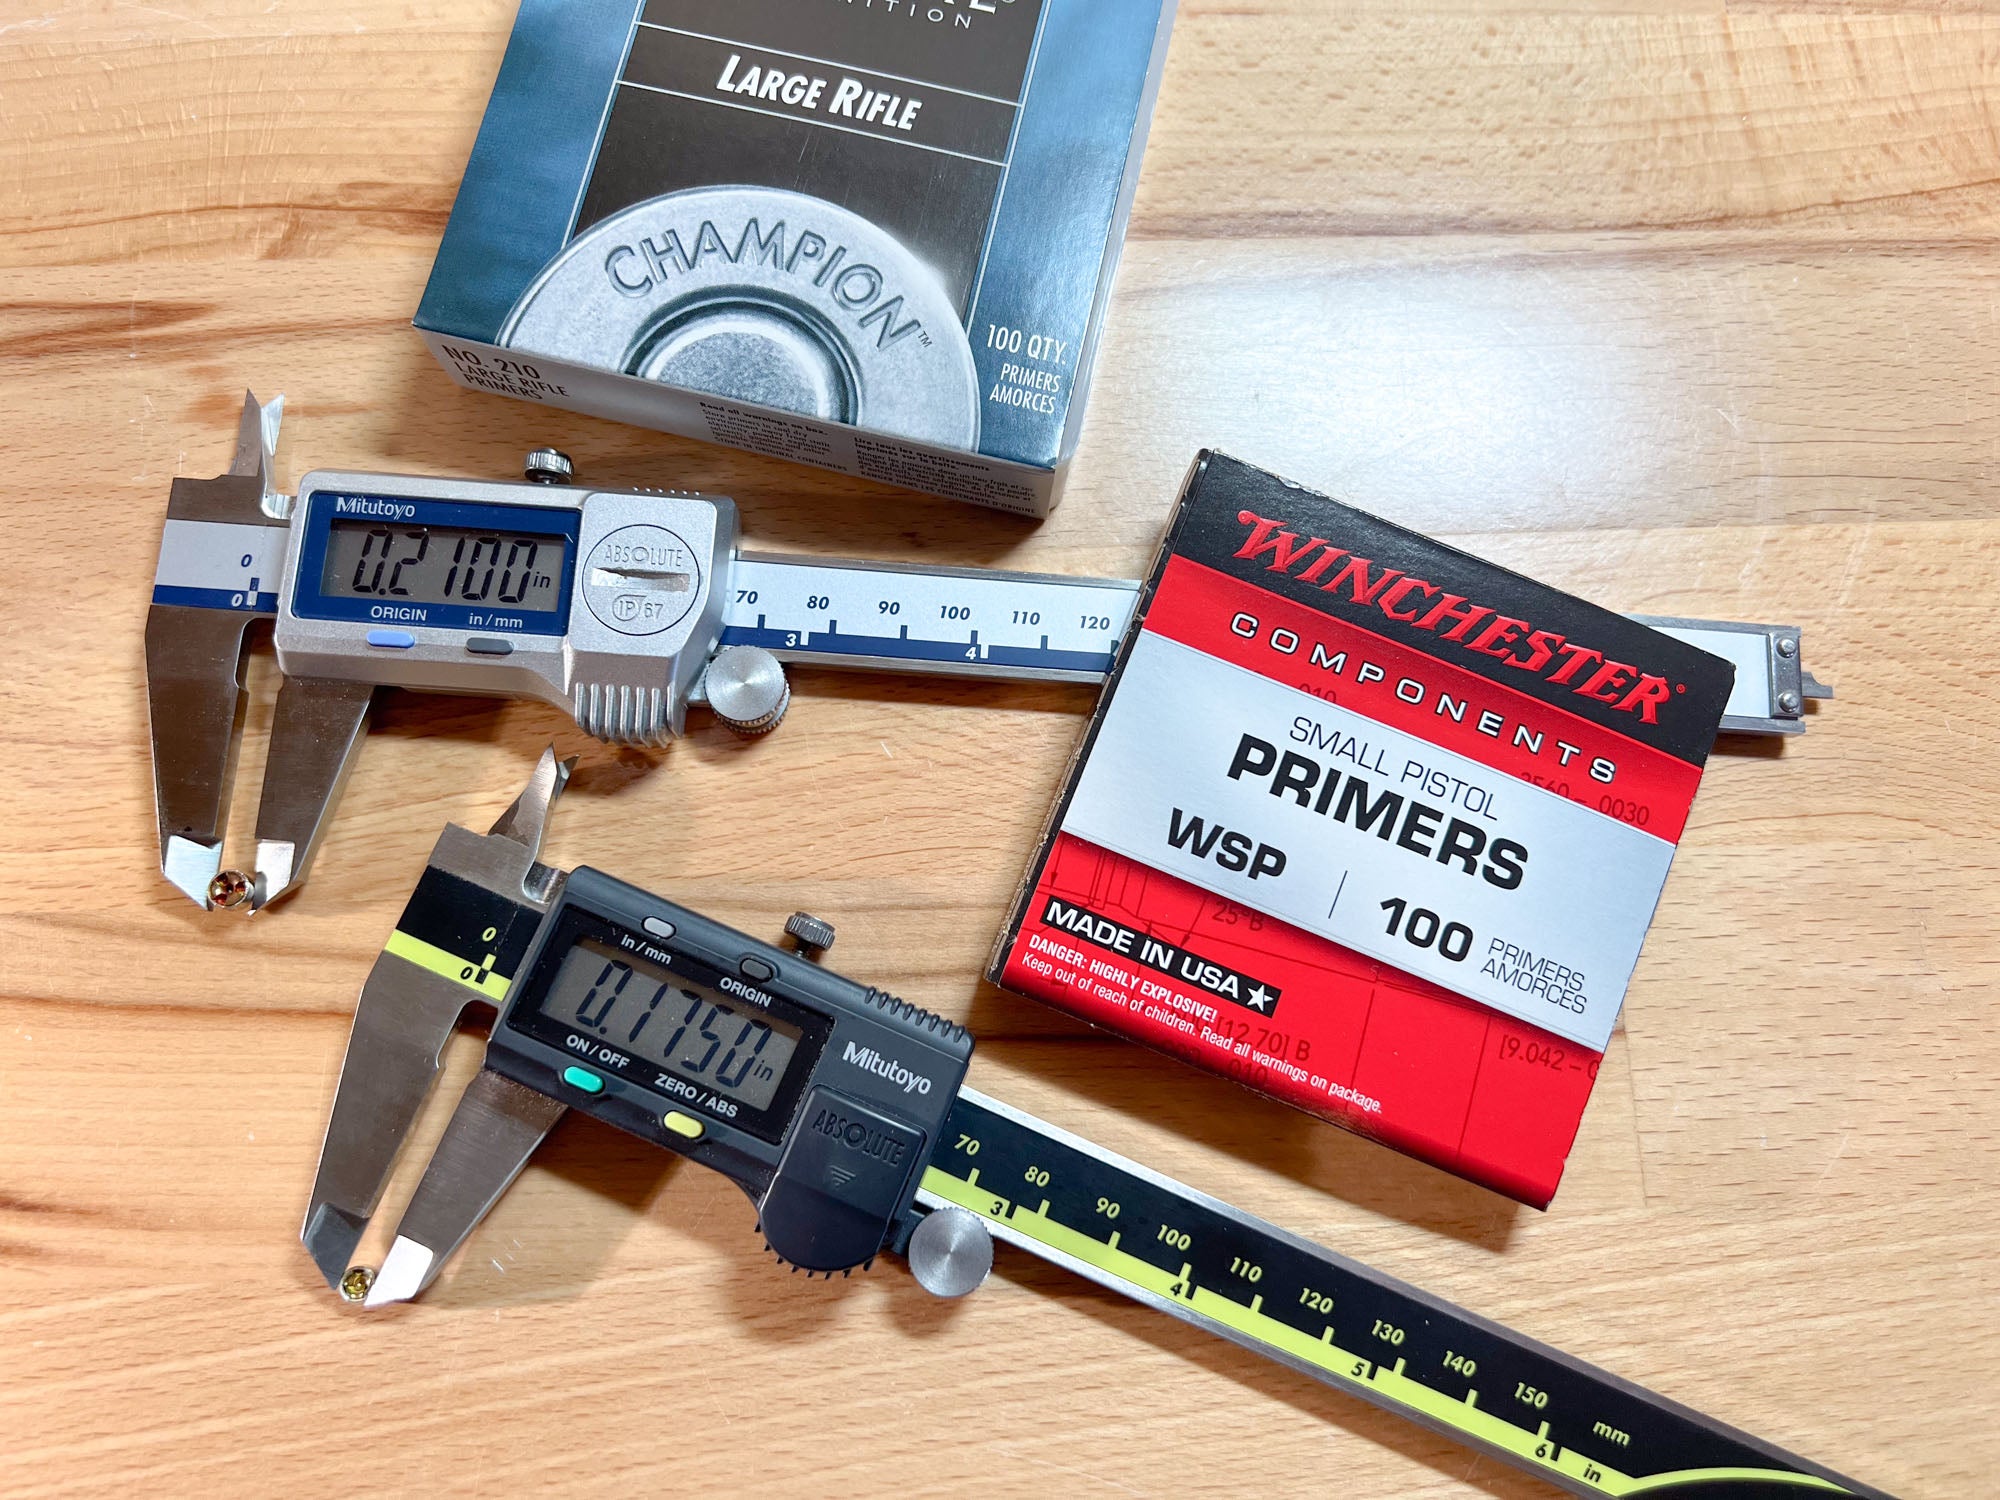 Small primers have a diameter of 0.175 inches while large primers measure 0.210 inches. 